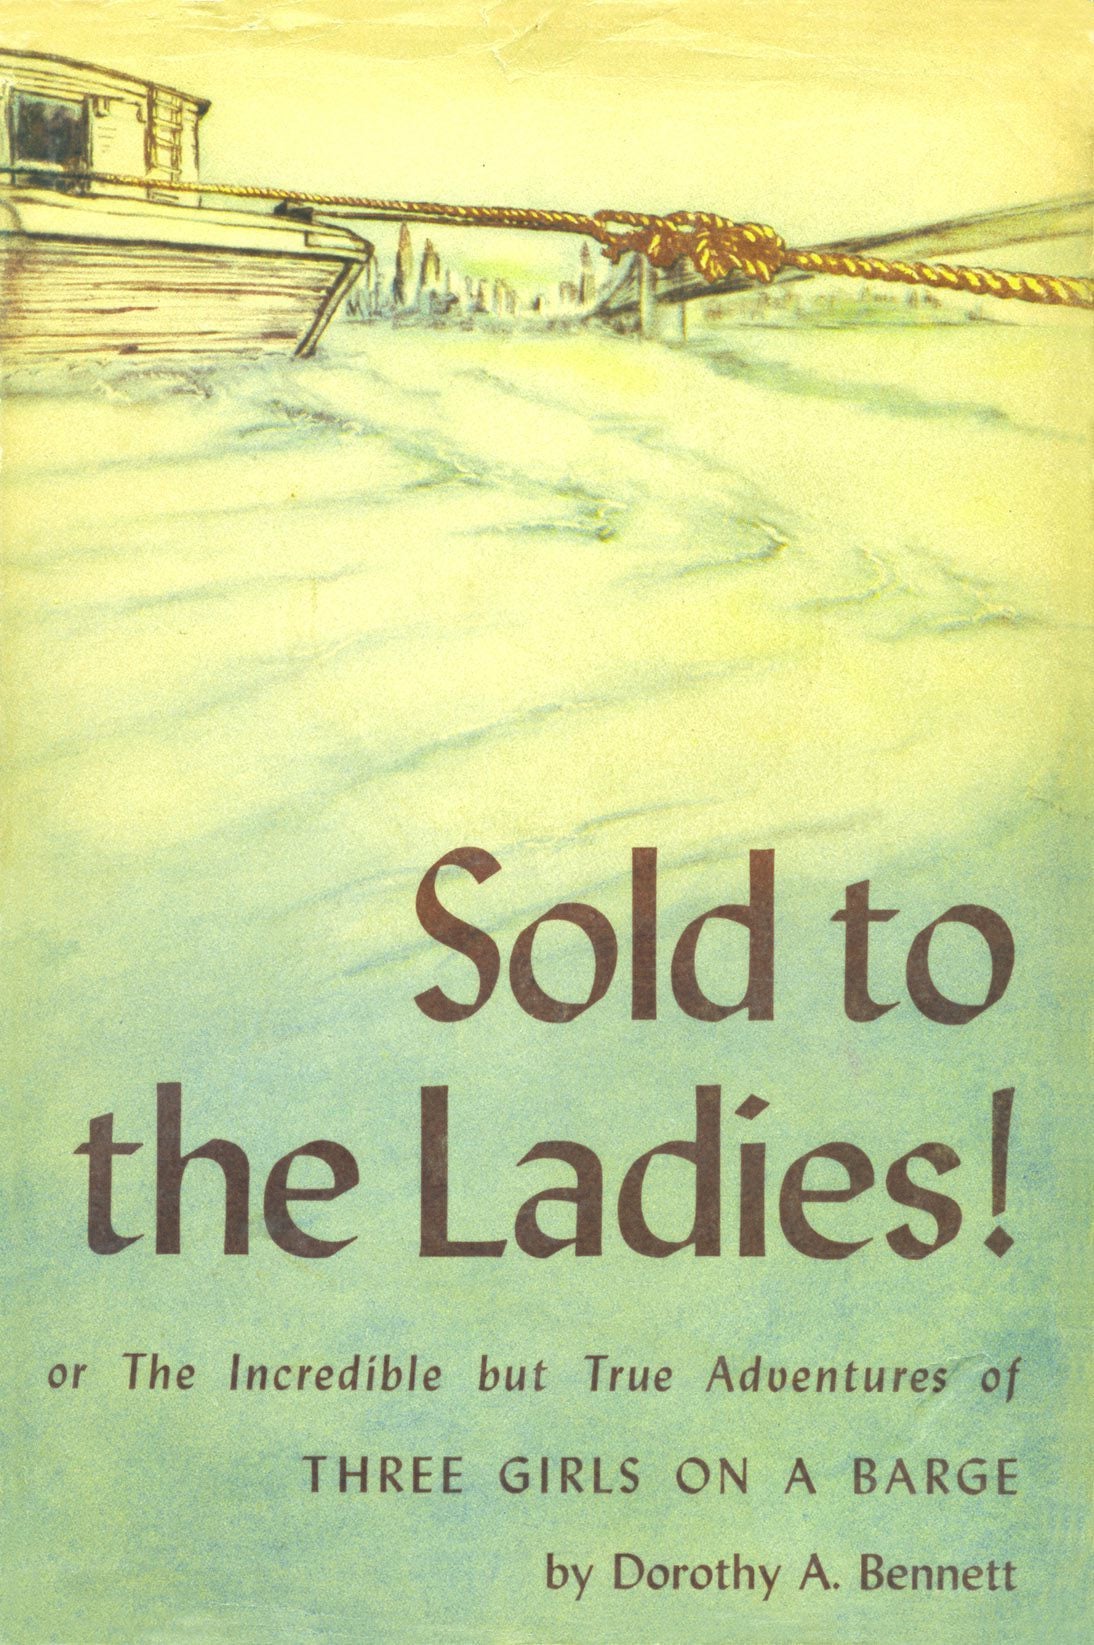 Sold to the Ladies! or The Incredible but True Adventures of THREE GIRLS ON A BARGE, by Dorothy A. Bennett